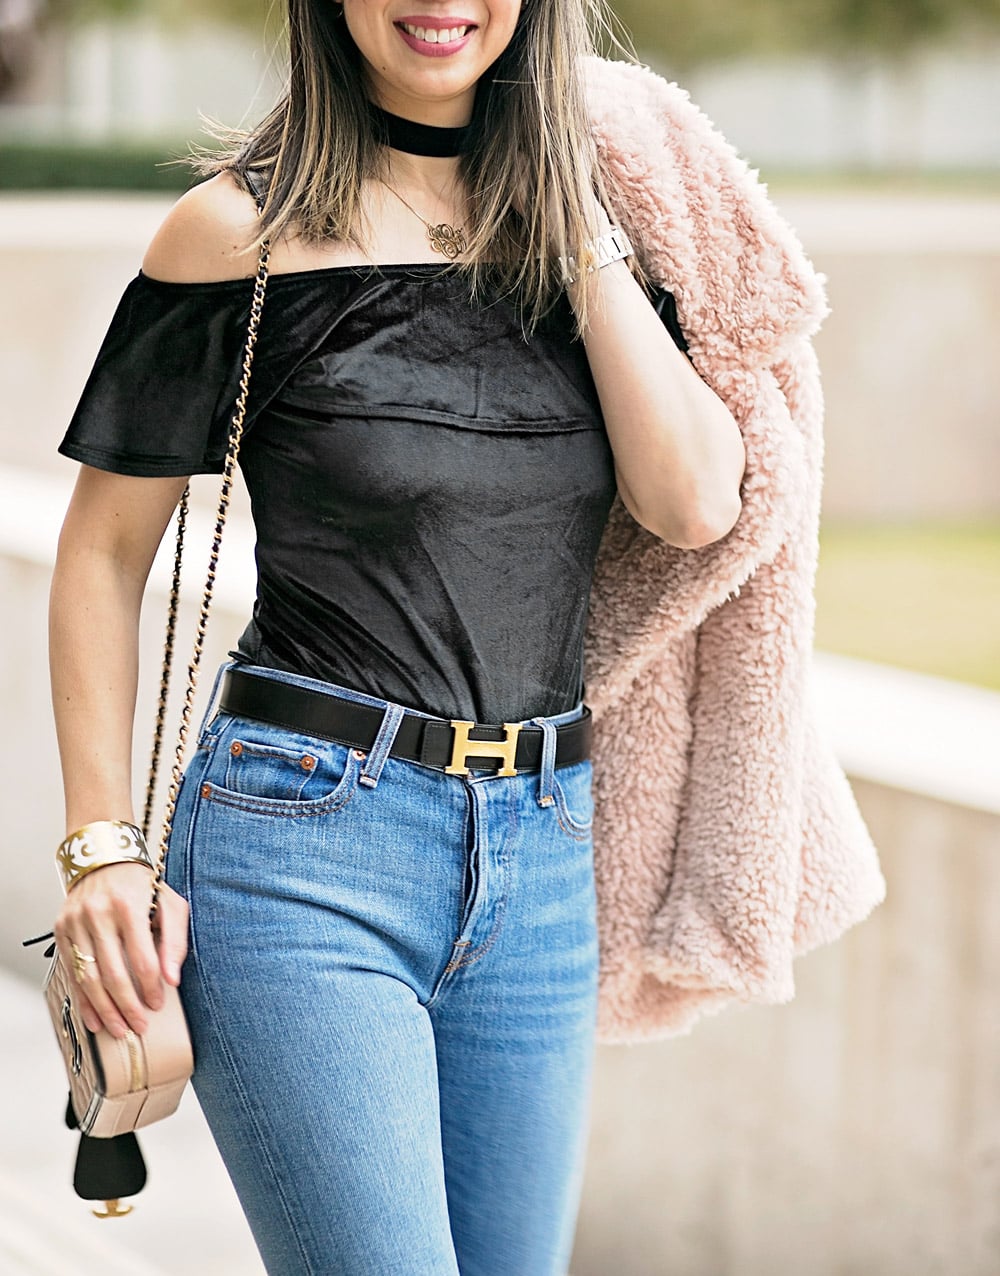 tularosa pink fur coat, velvet off the shoulder top with high waisted jeans and chanel slingbacks